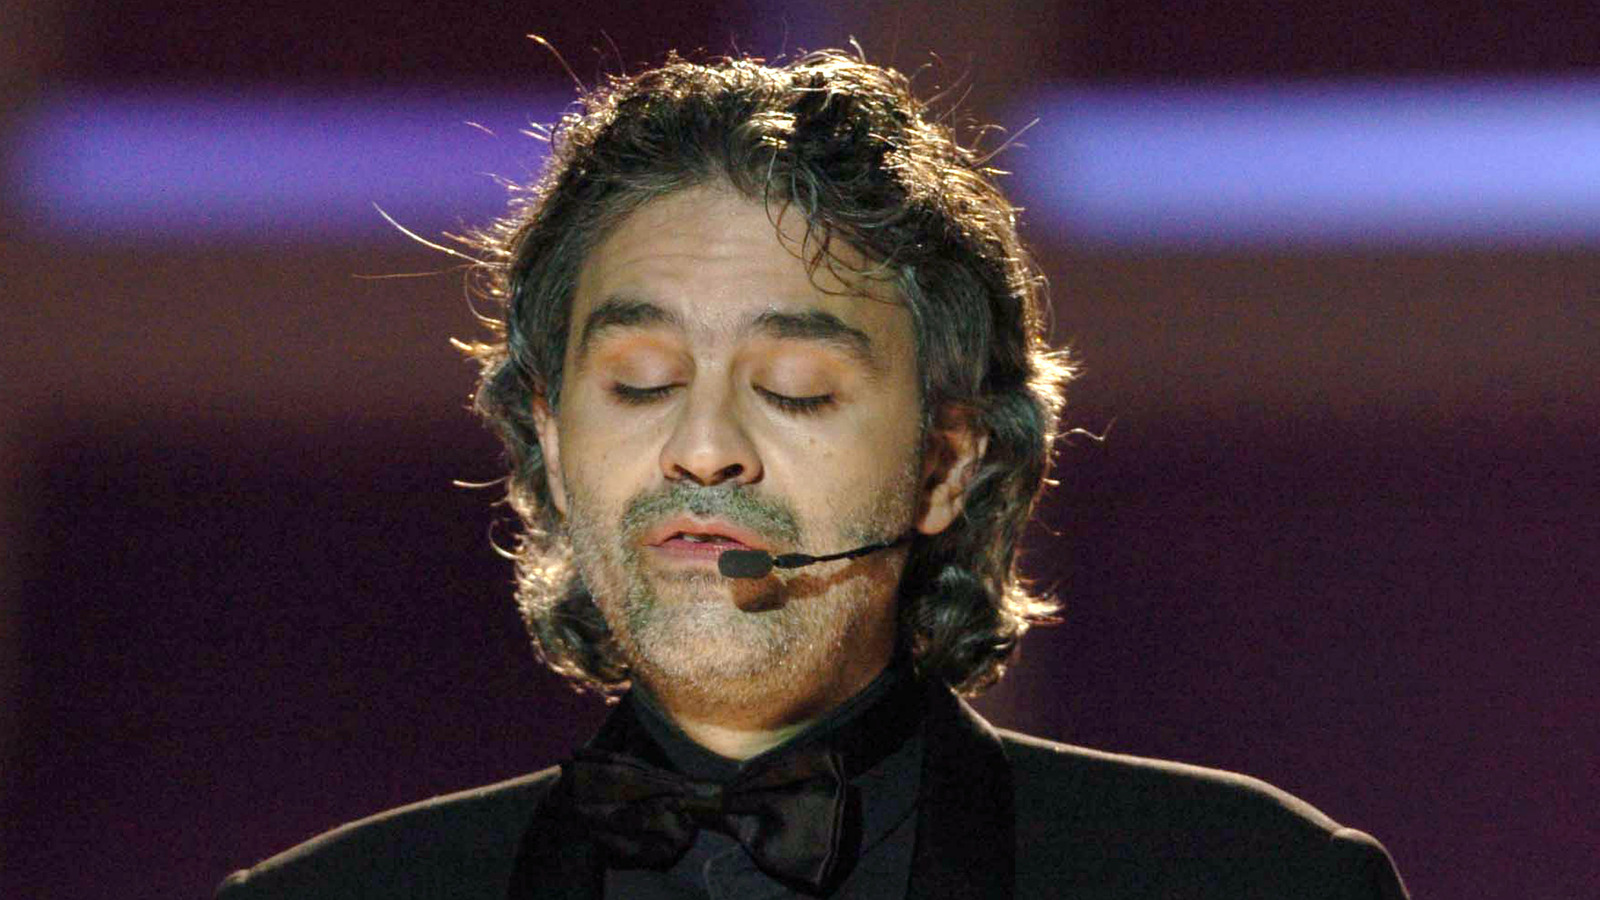 Blind opera singer Andrea Bocelli airlifted to hospital after falling off